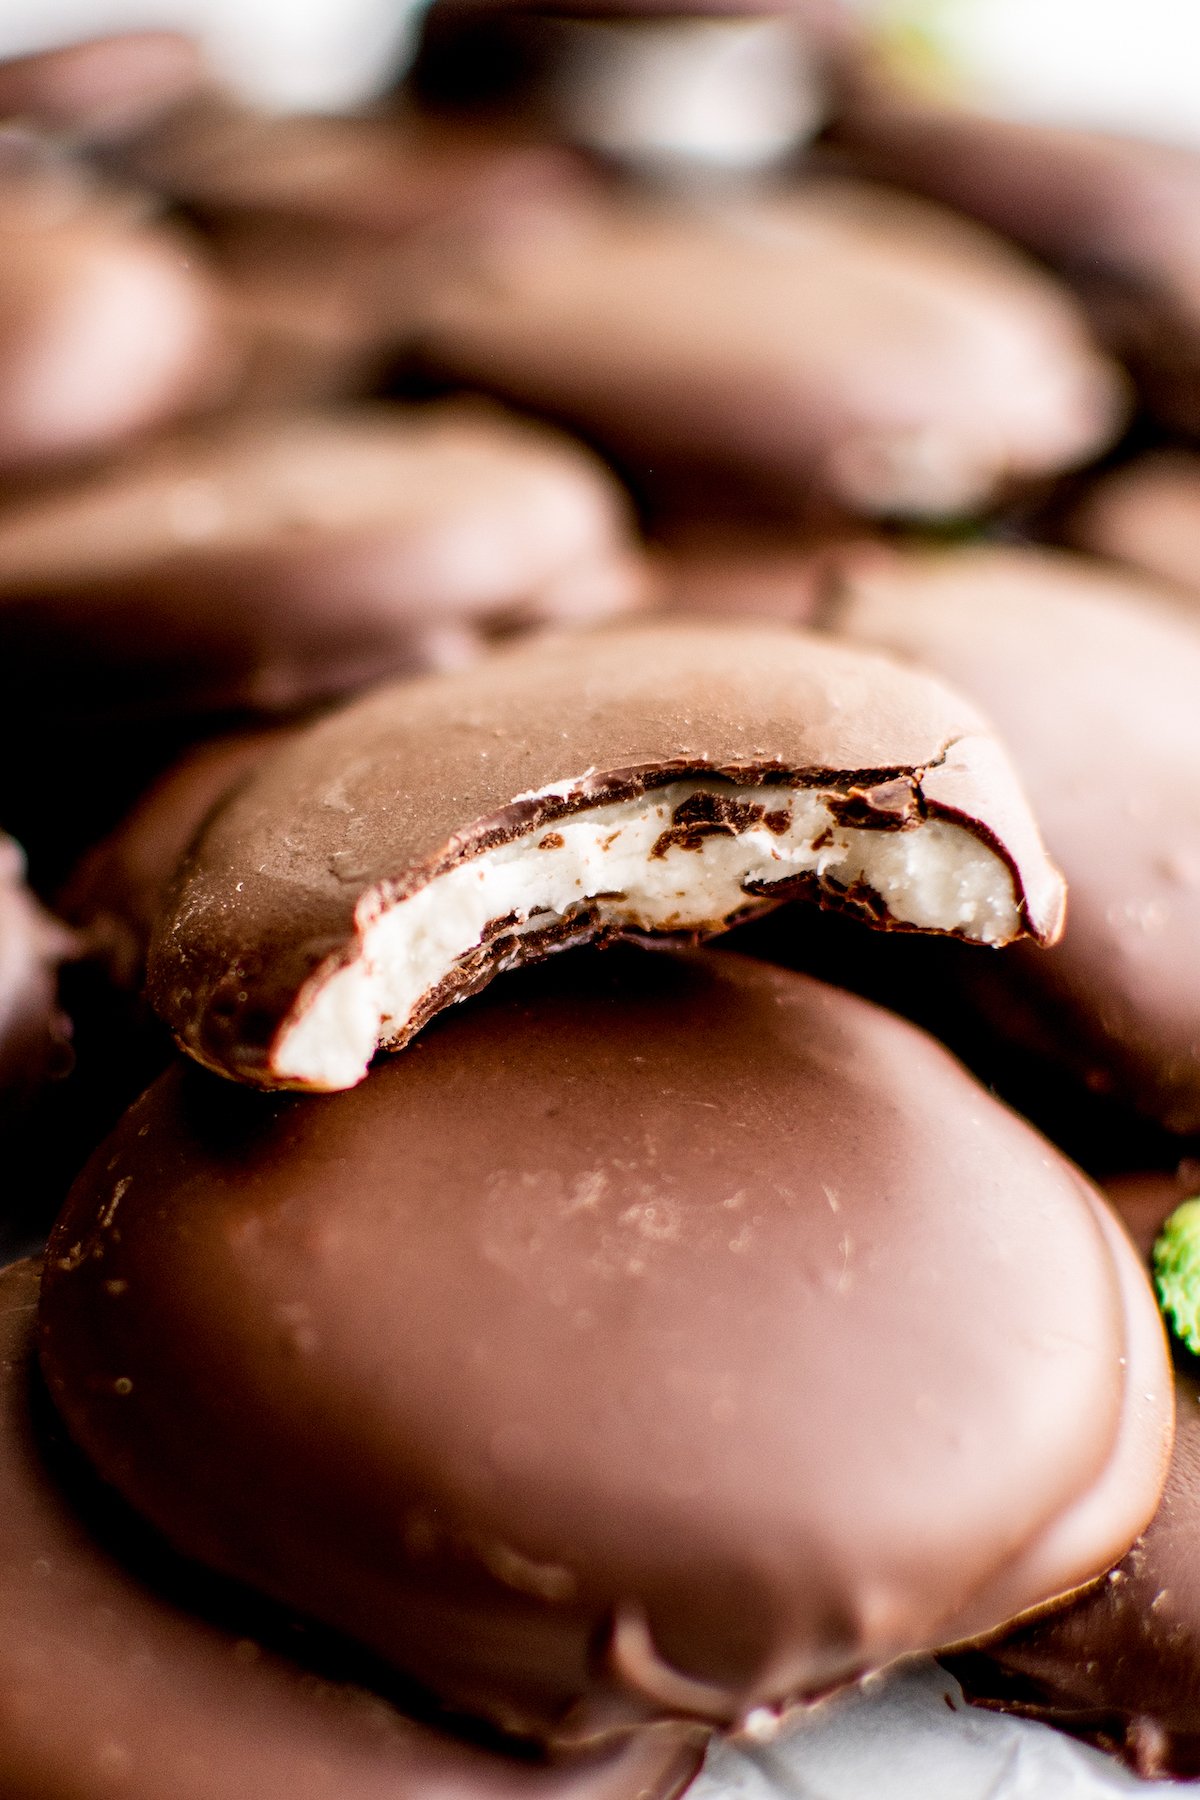 Peppermint patties. One has a bite taken from it to show the texture of the filling.